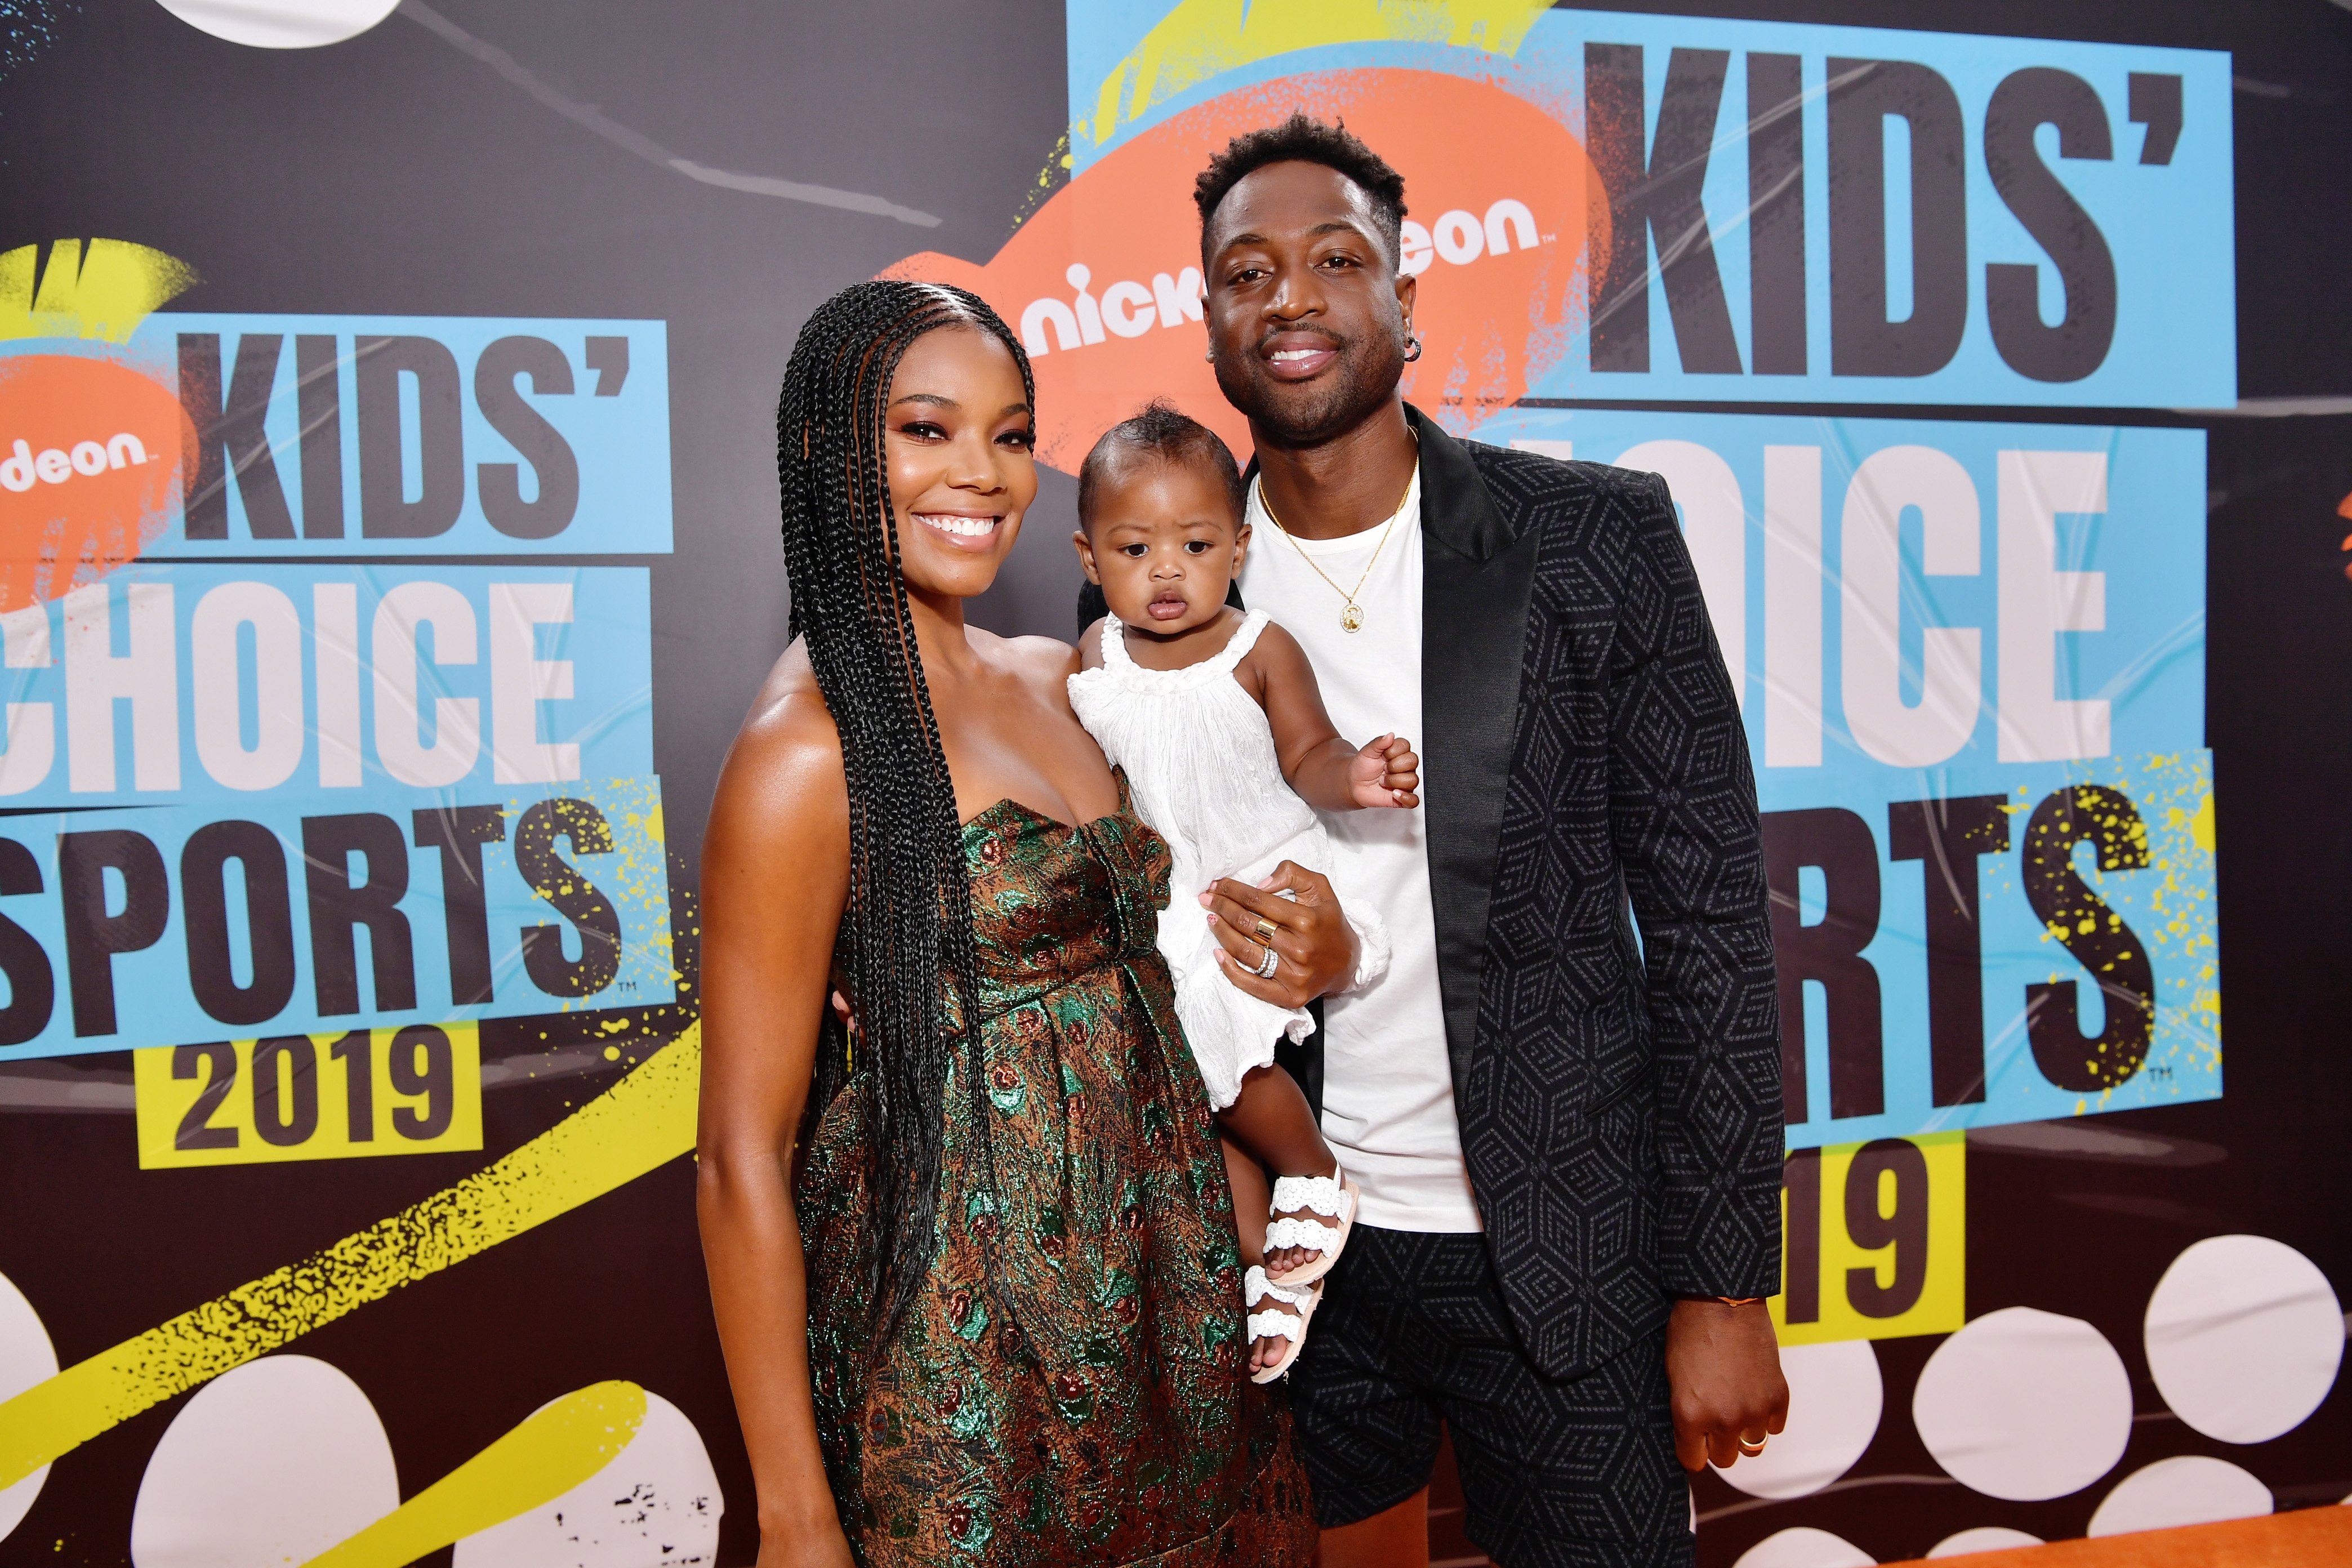 Gabrielle Union and Dwyane Wade with their daughter, Kaavia James attending Nickelodeon Kids' Choice Sports 2019 on July 11, 2019 | Photo: Getty Images